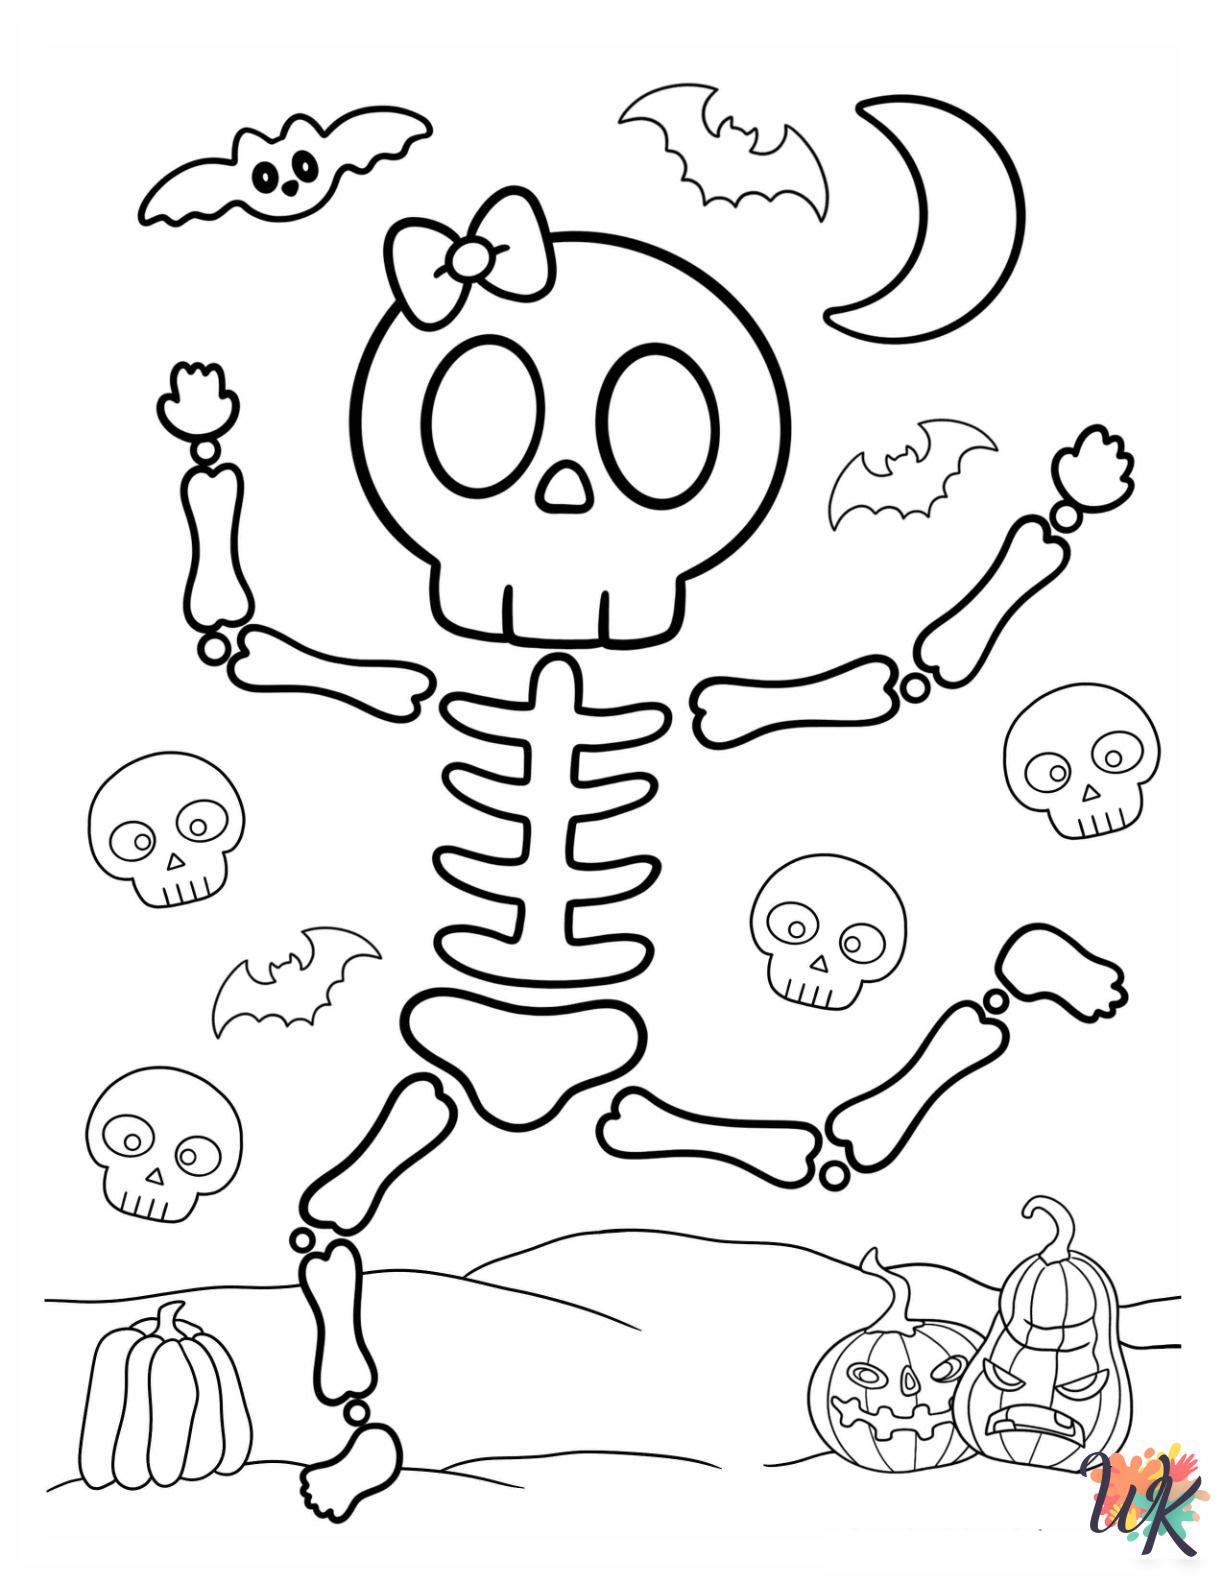 Skeleton Coloring Pages 10